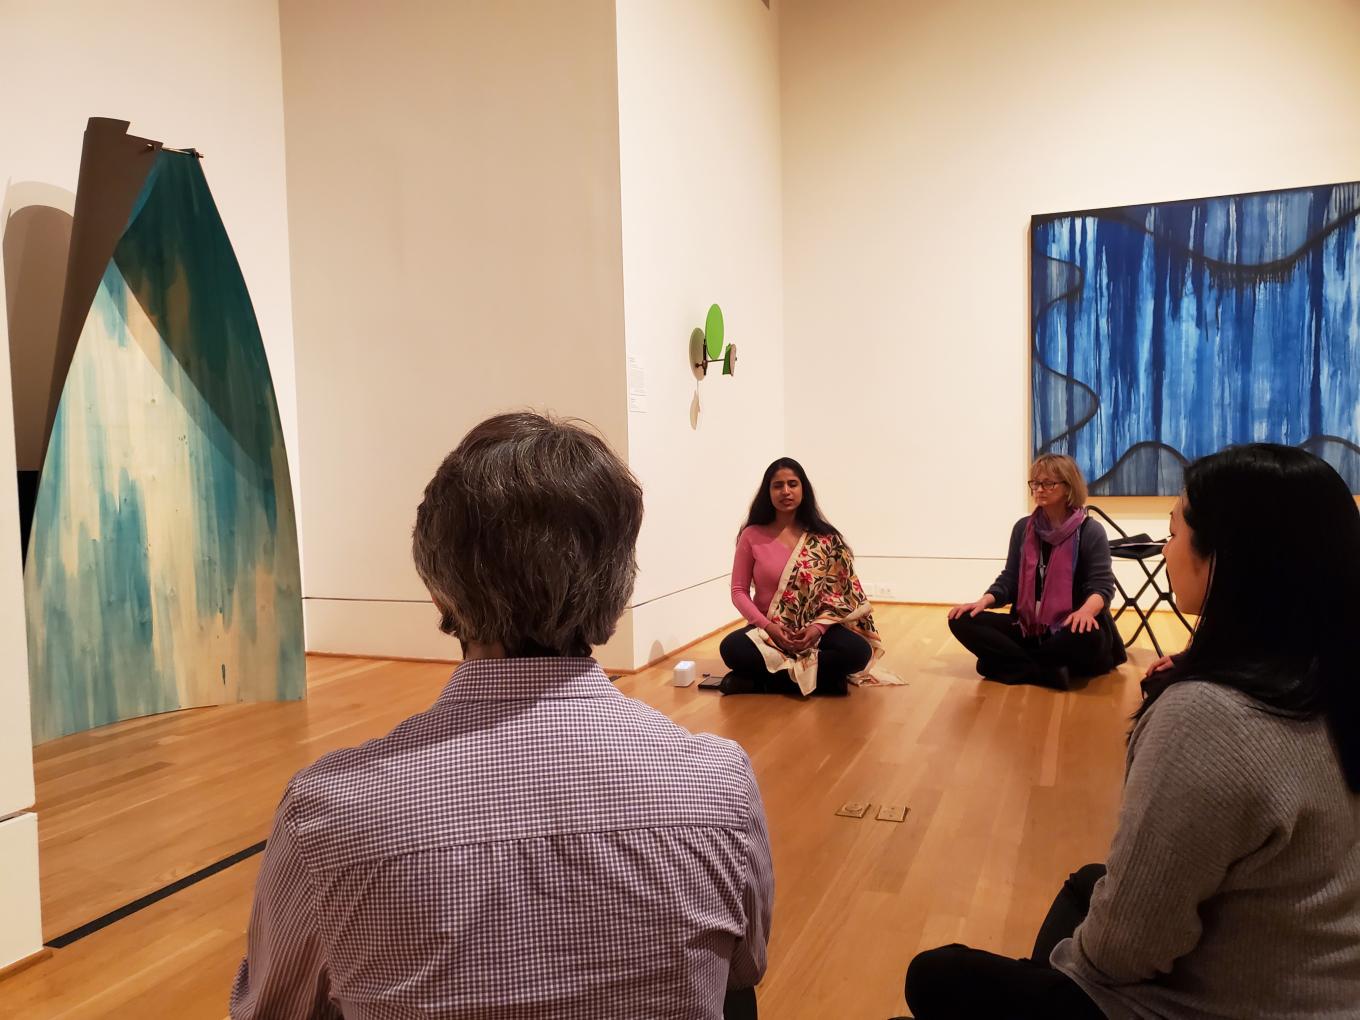 Meditation in the Gallery